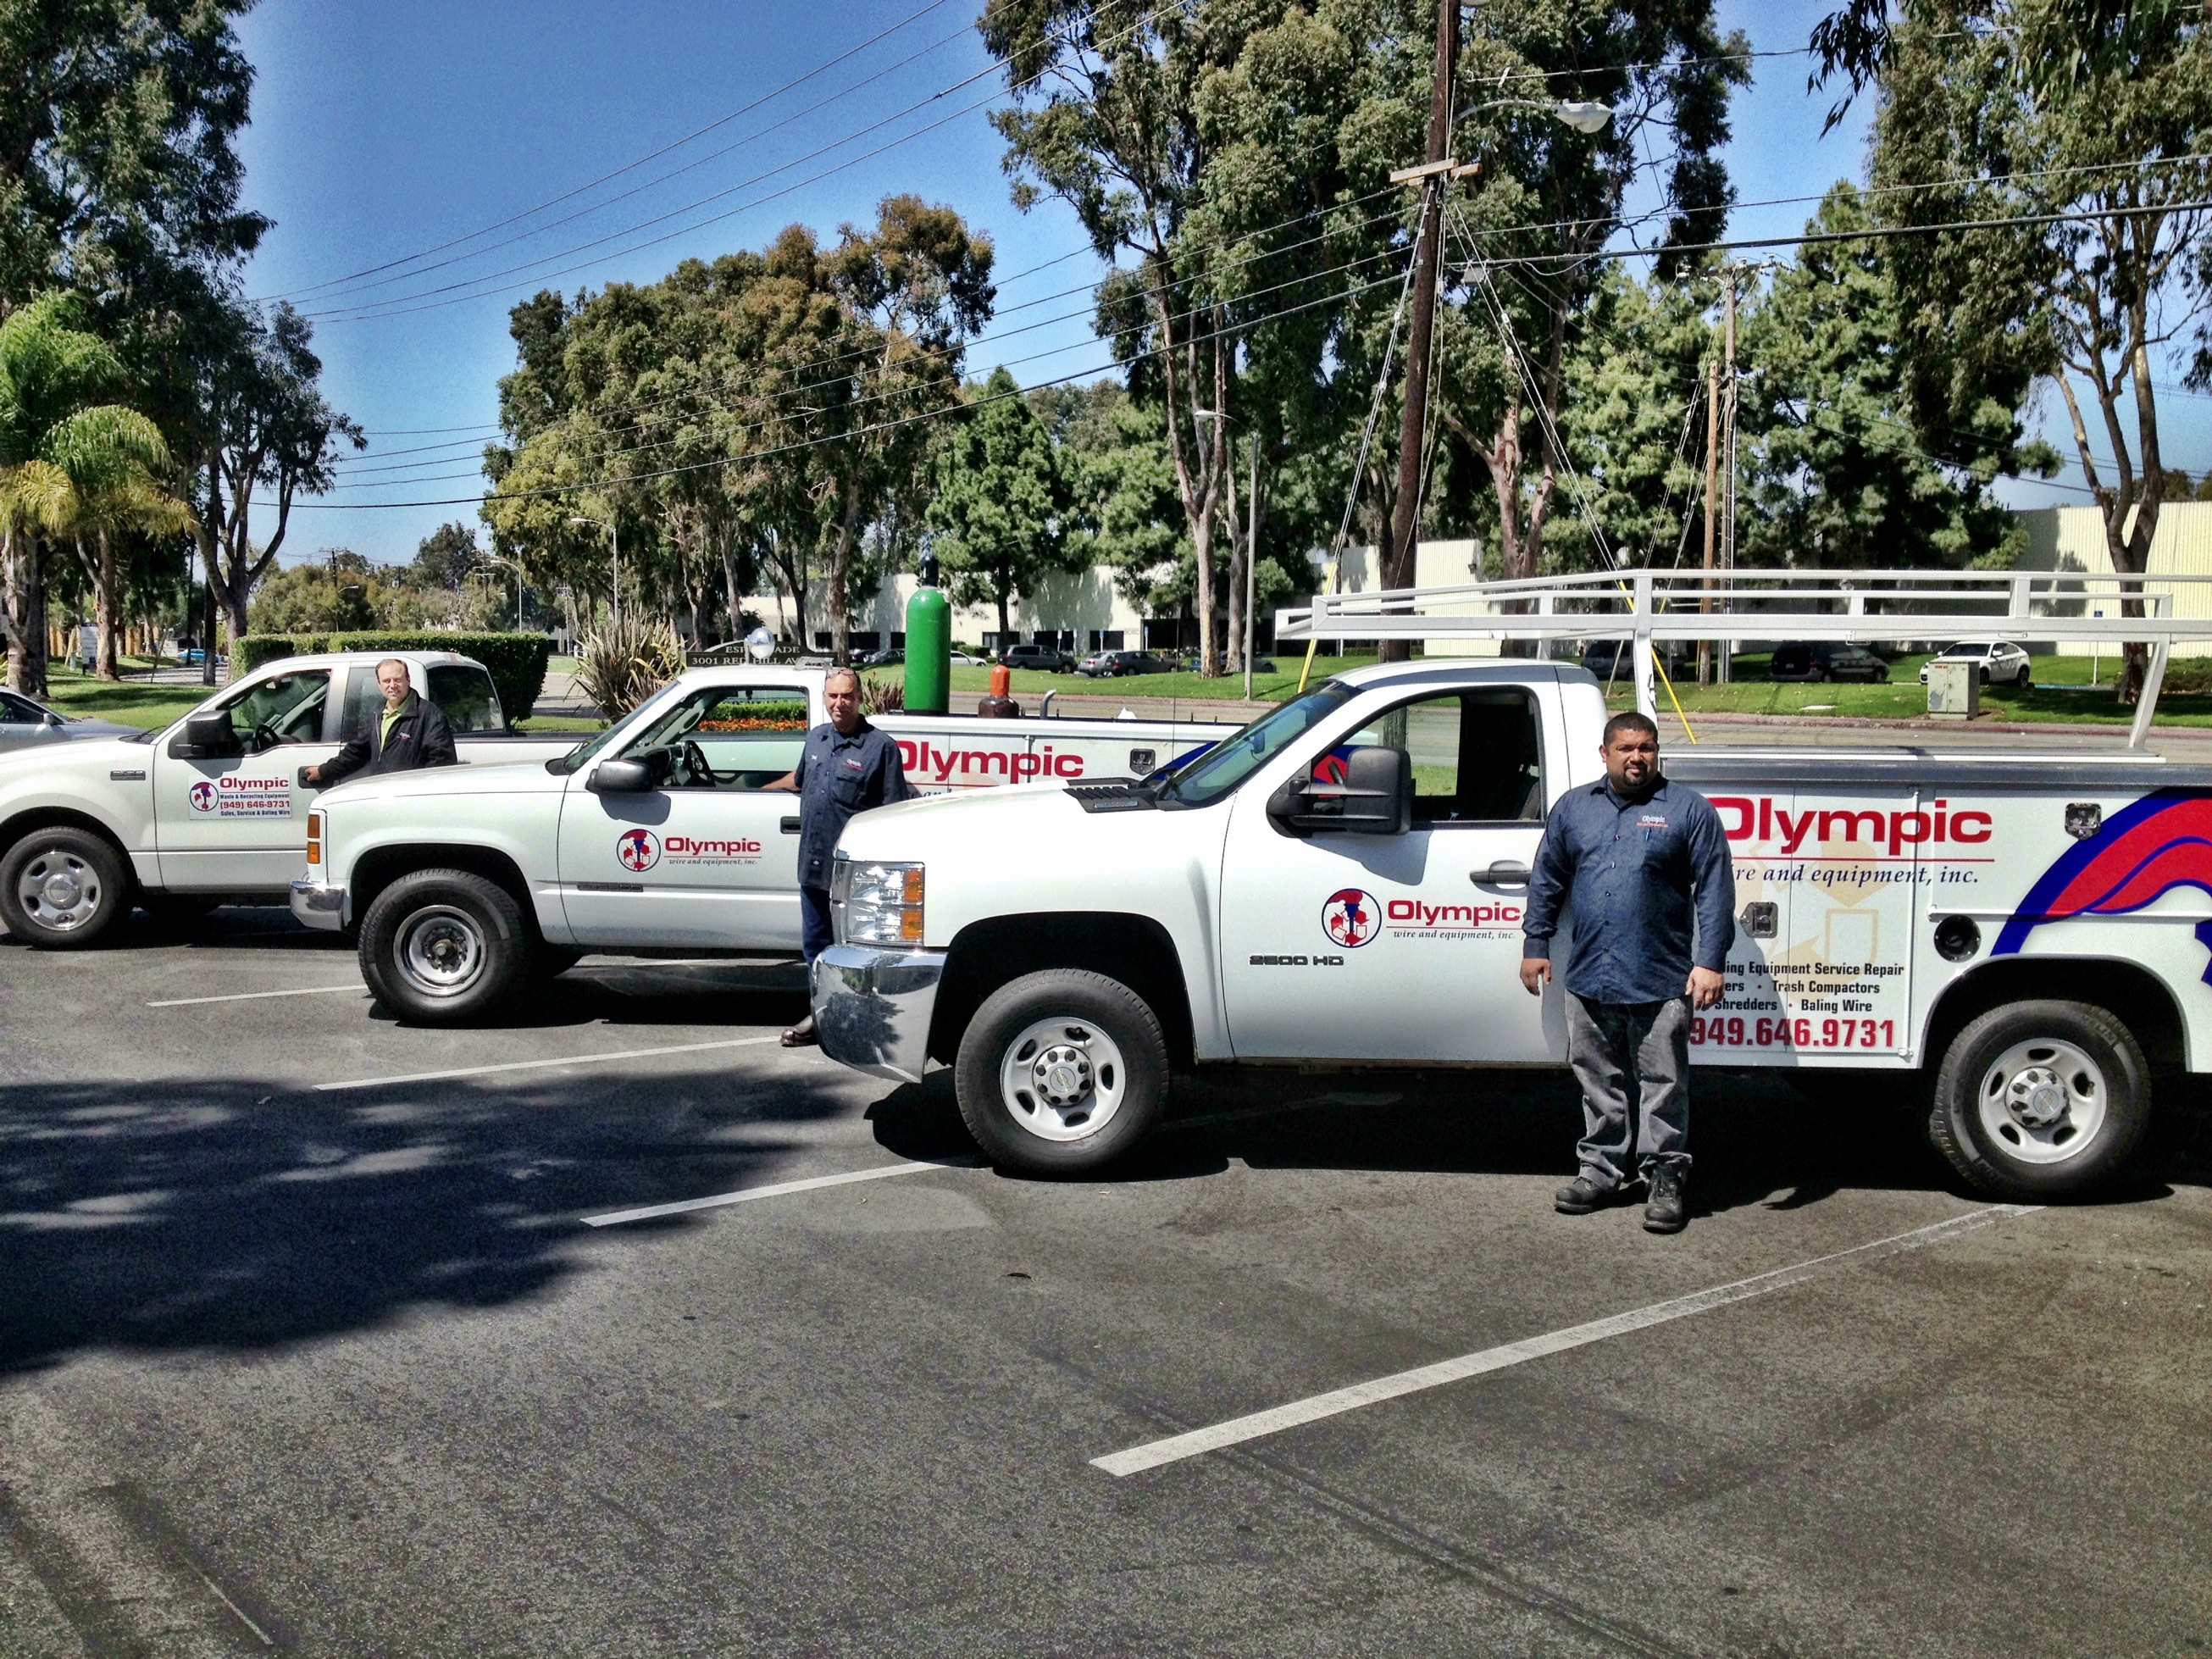 24/7 Service Department On Staff For Northern & Southern California